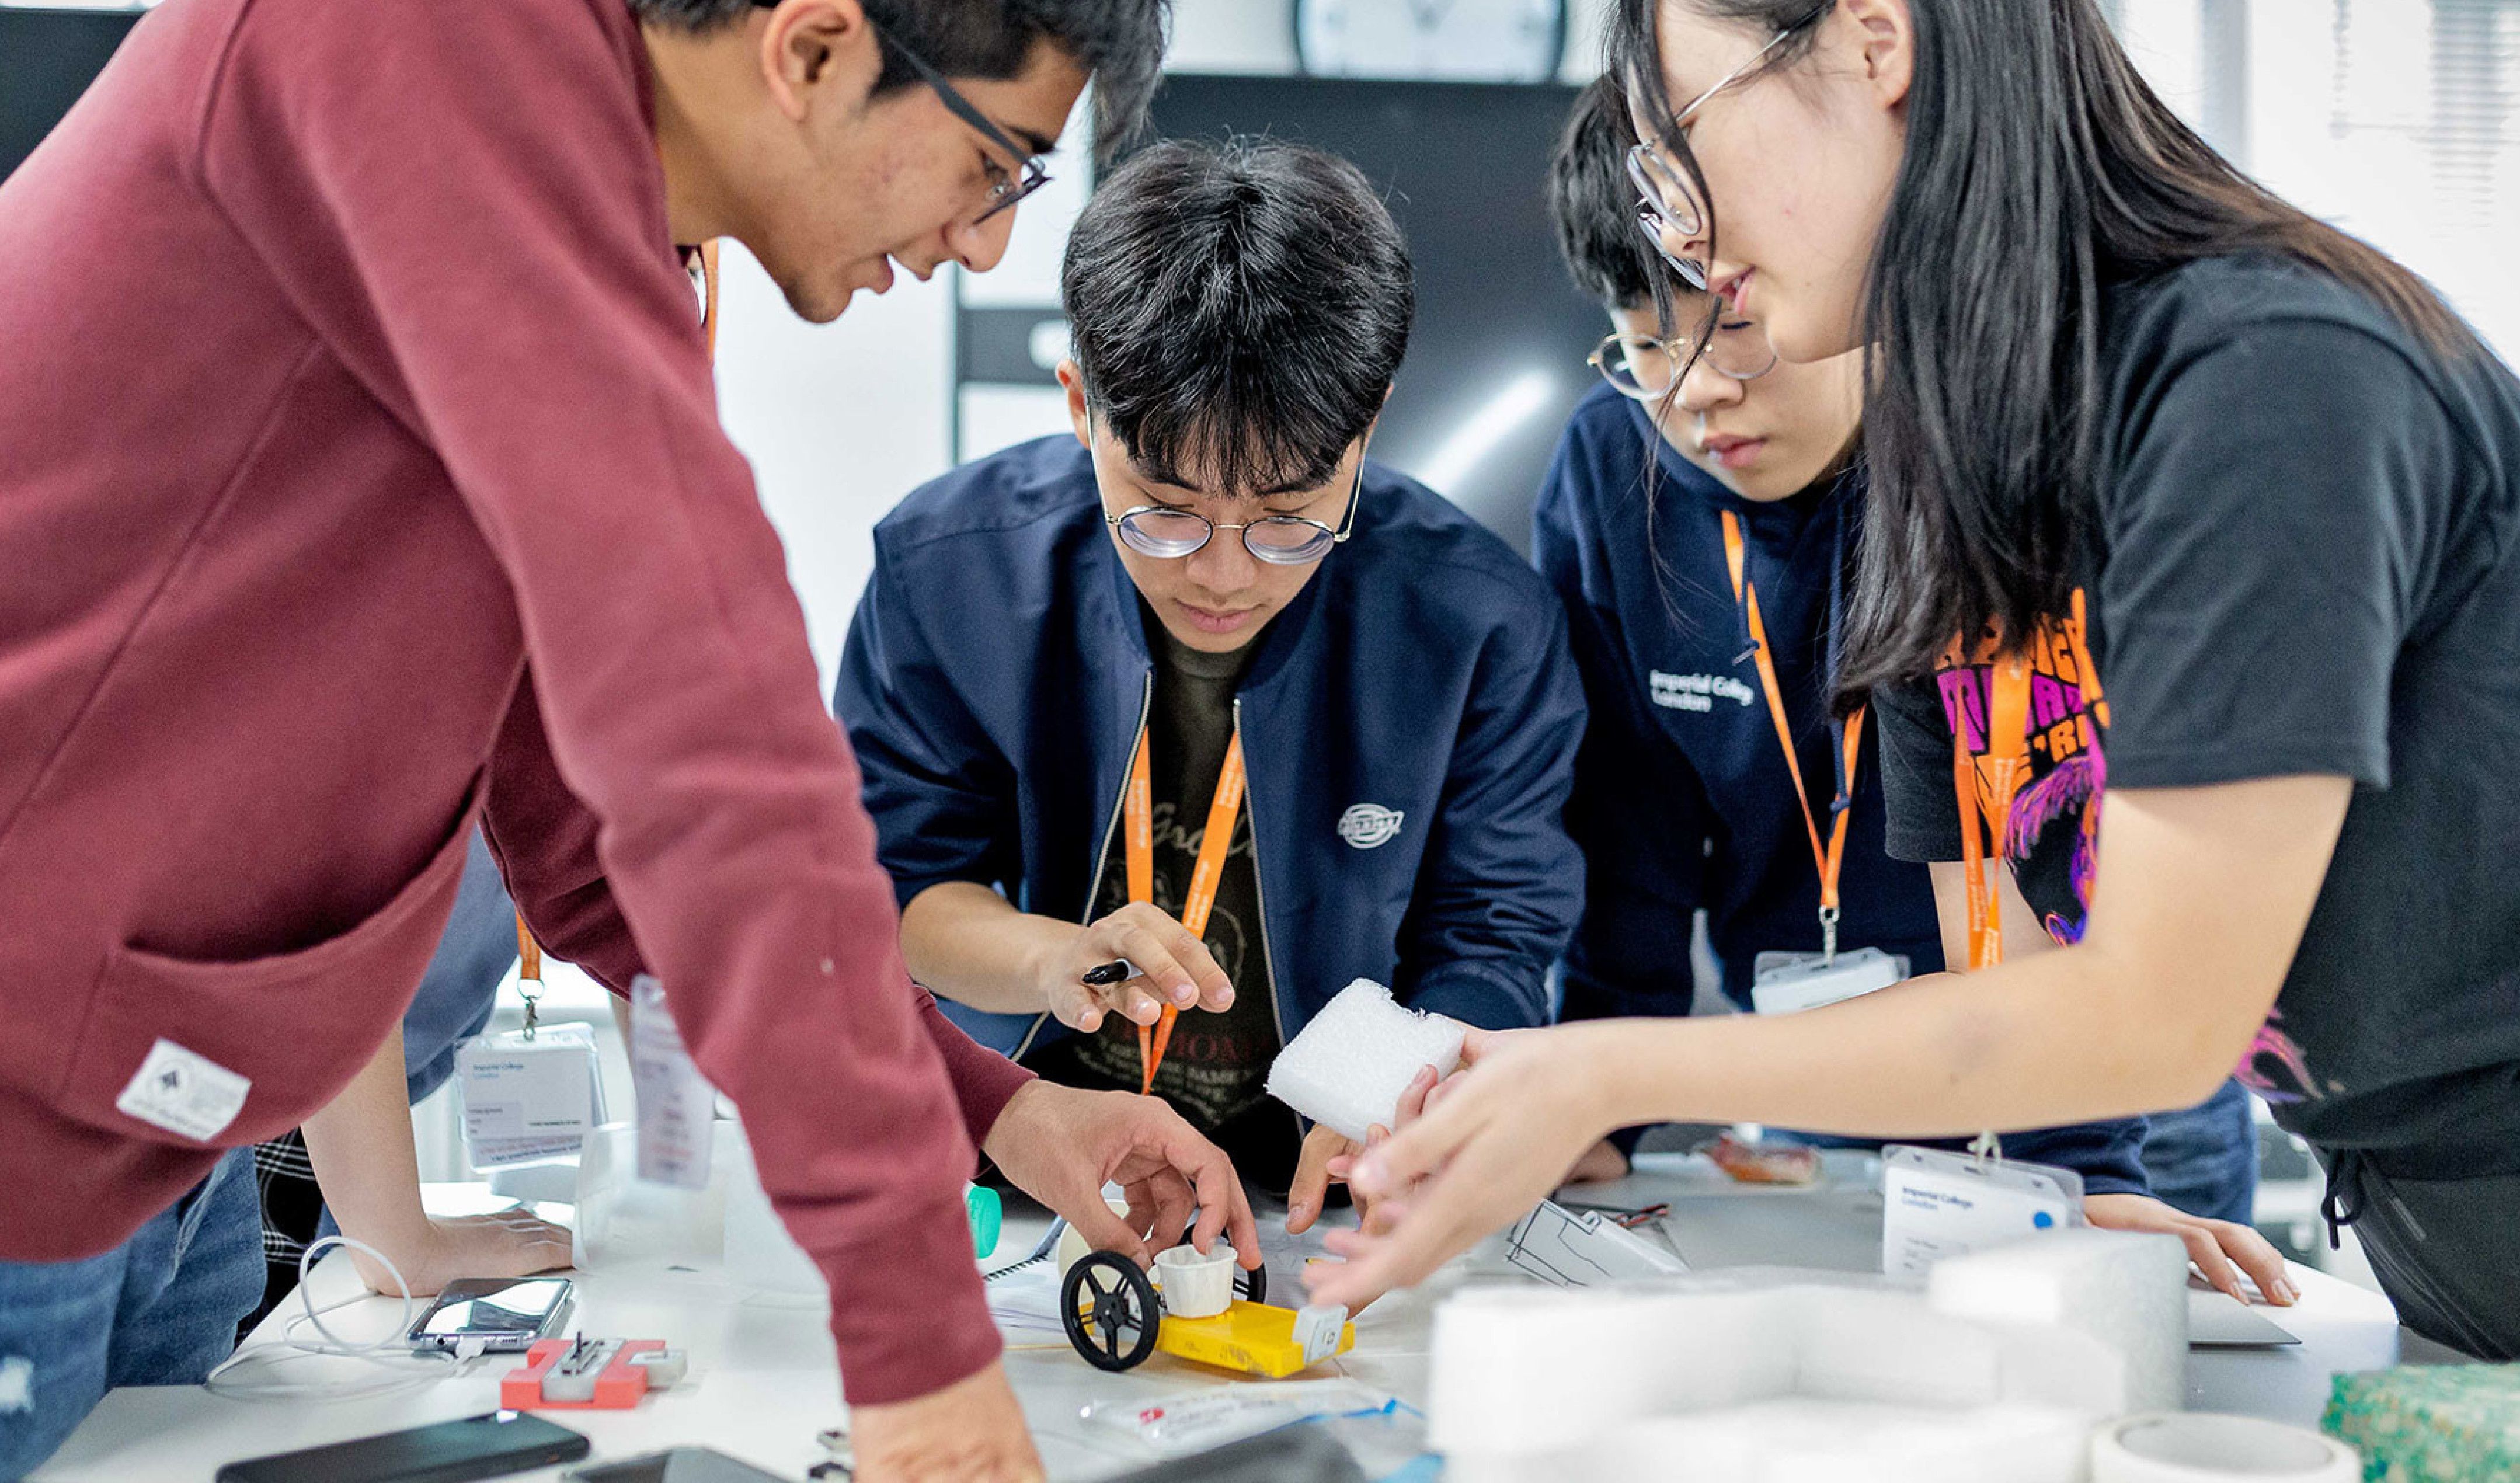 Students building a second prototype robot